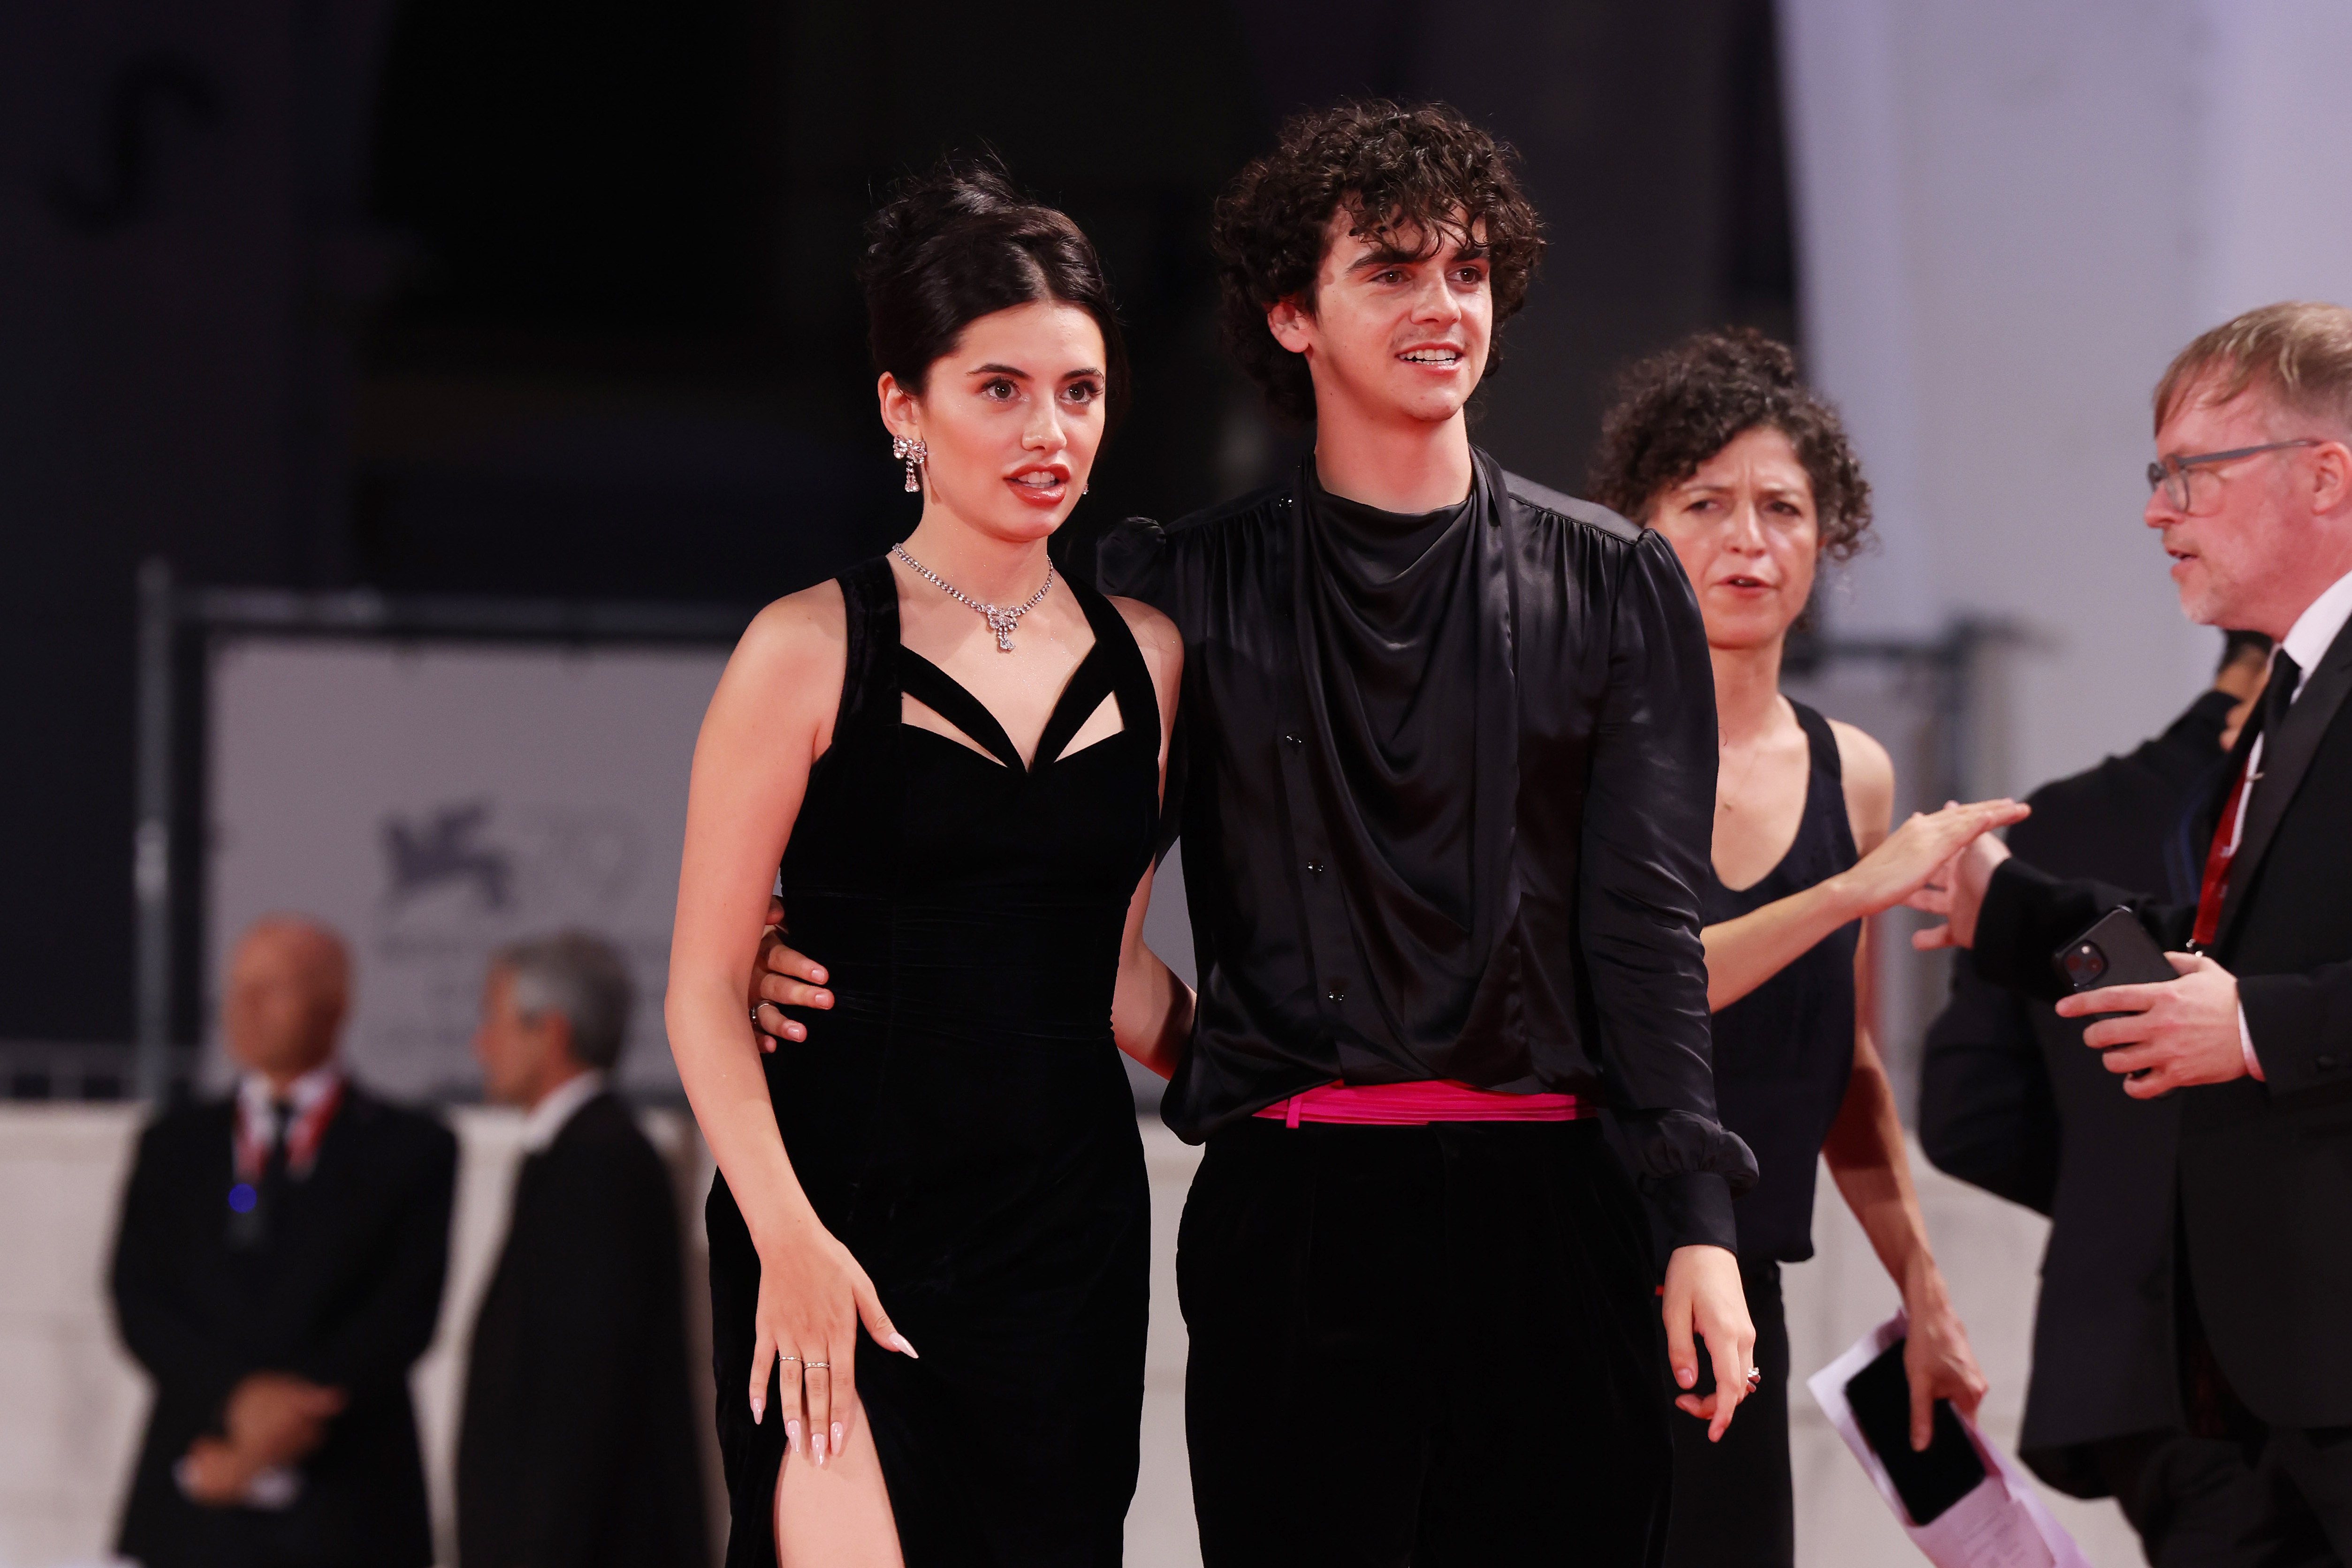 Morgan Cohen and Jack Dylan Grazer at the 79th Venice International Film Festival on September 07, 2022, in Venice, Italy | Source: Getty Images